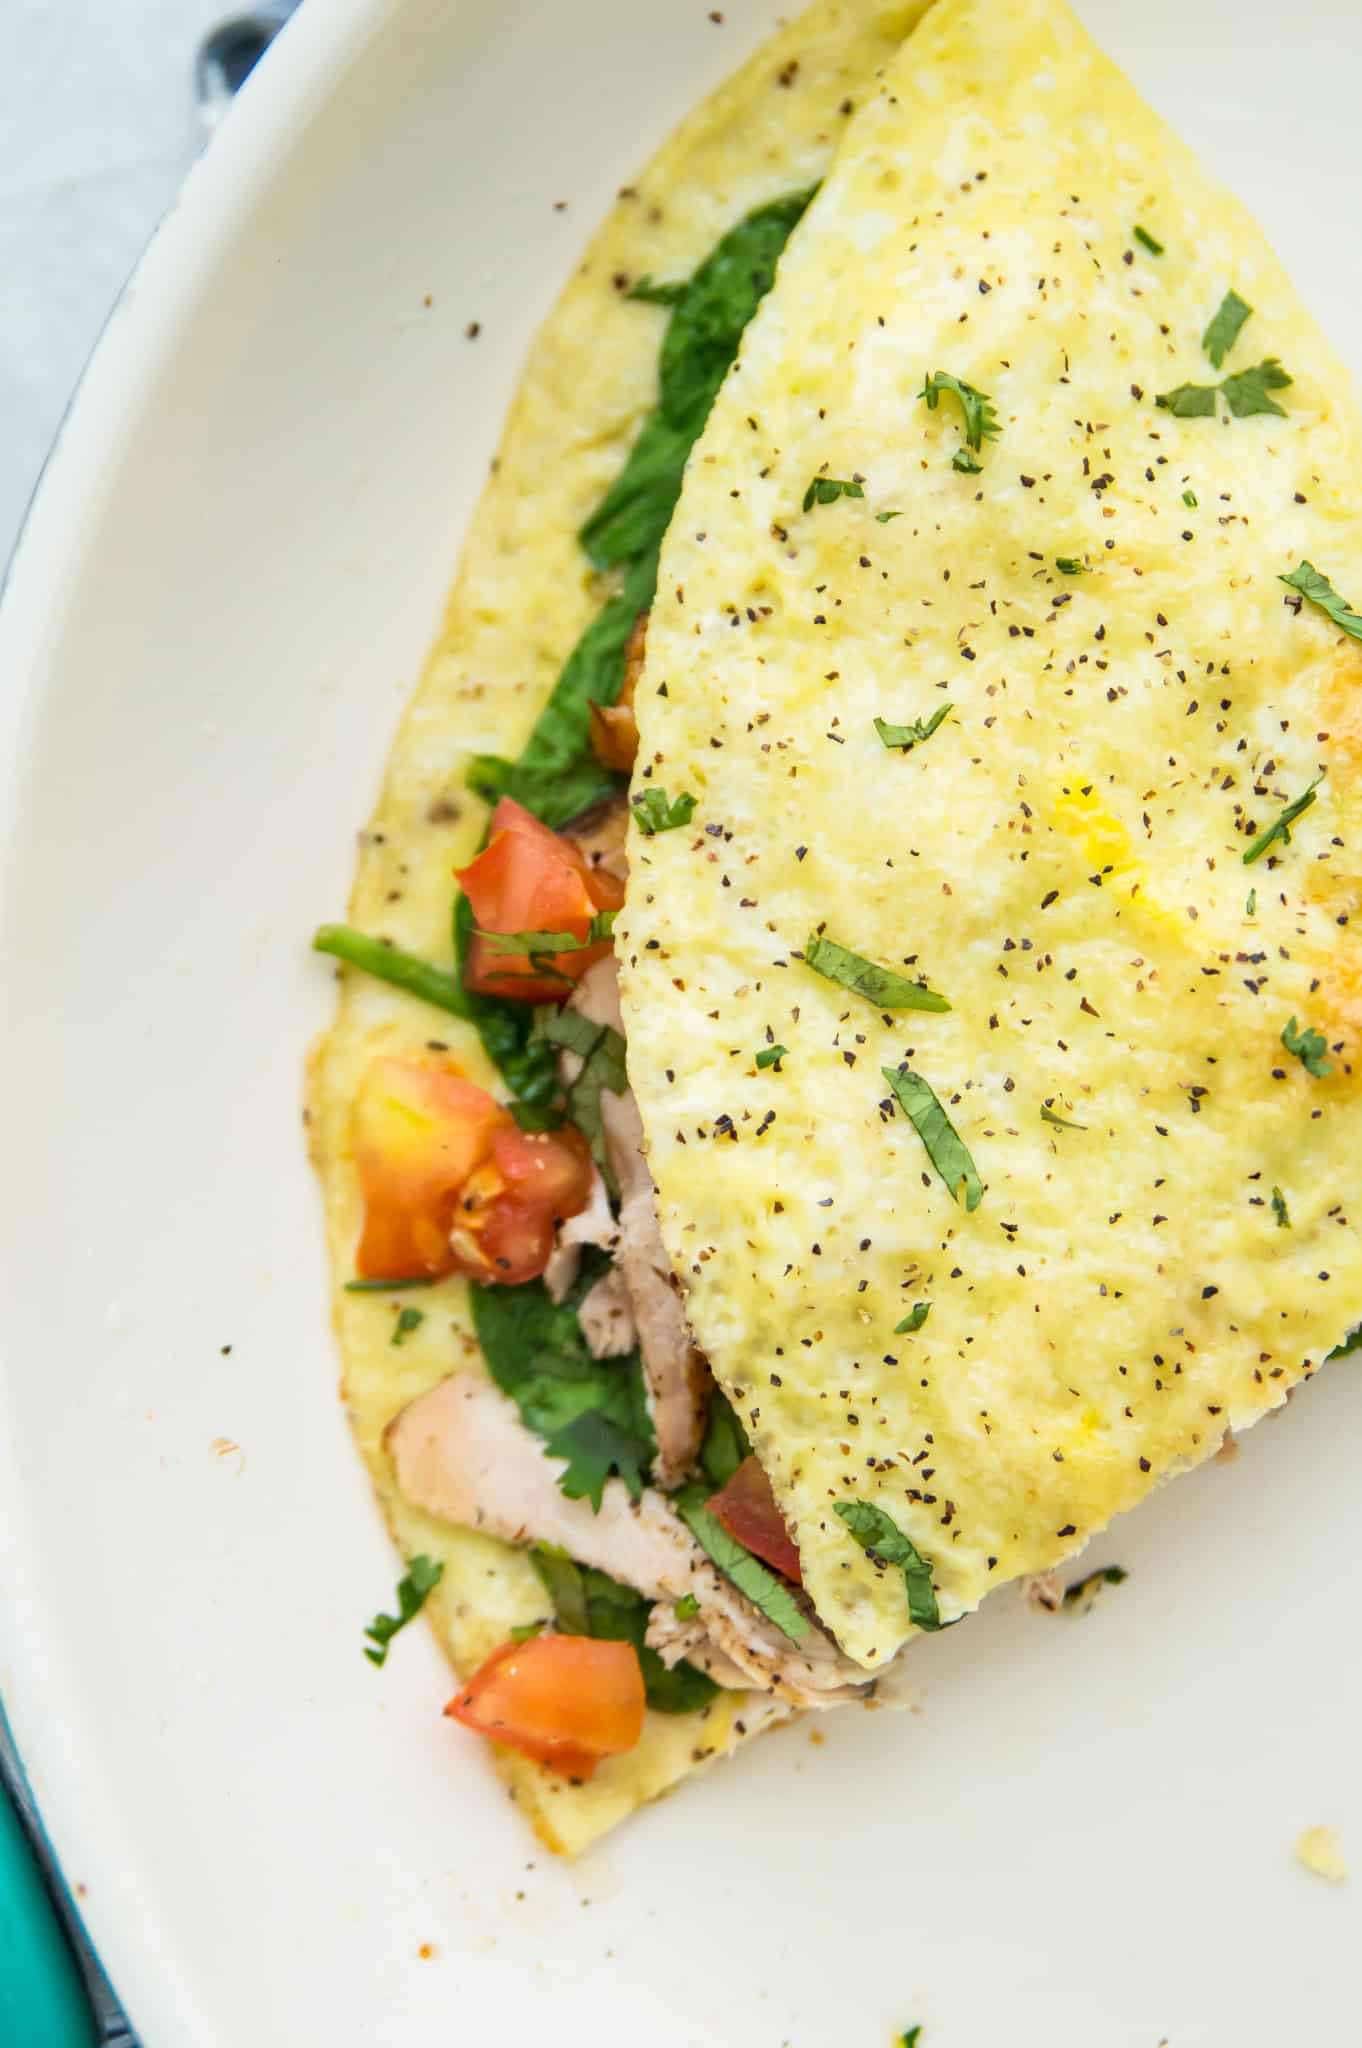 A chicken omelette that has been cut in half and filled with tomato and spinach.